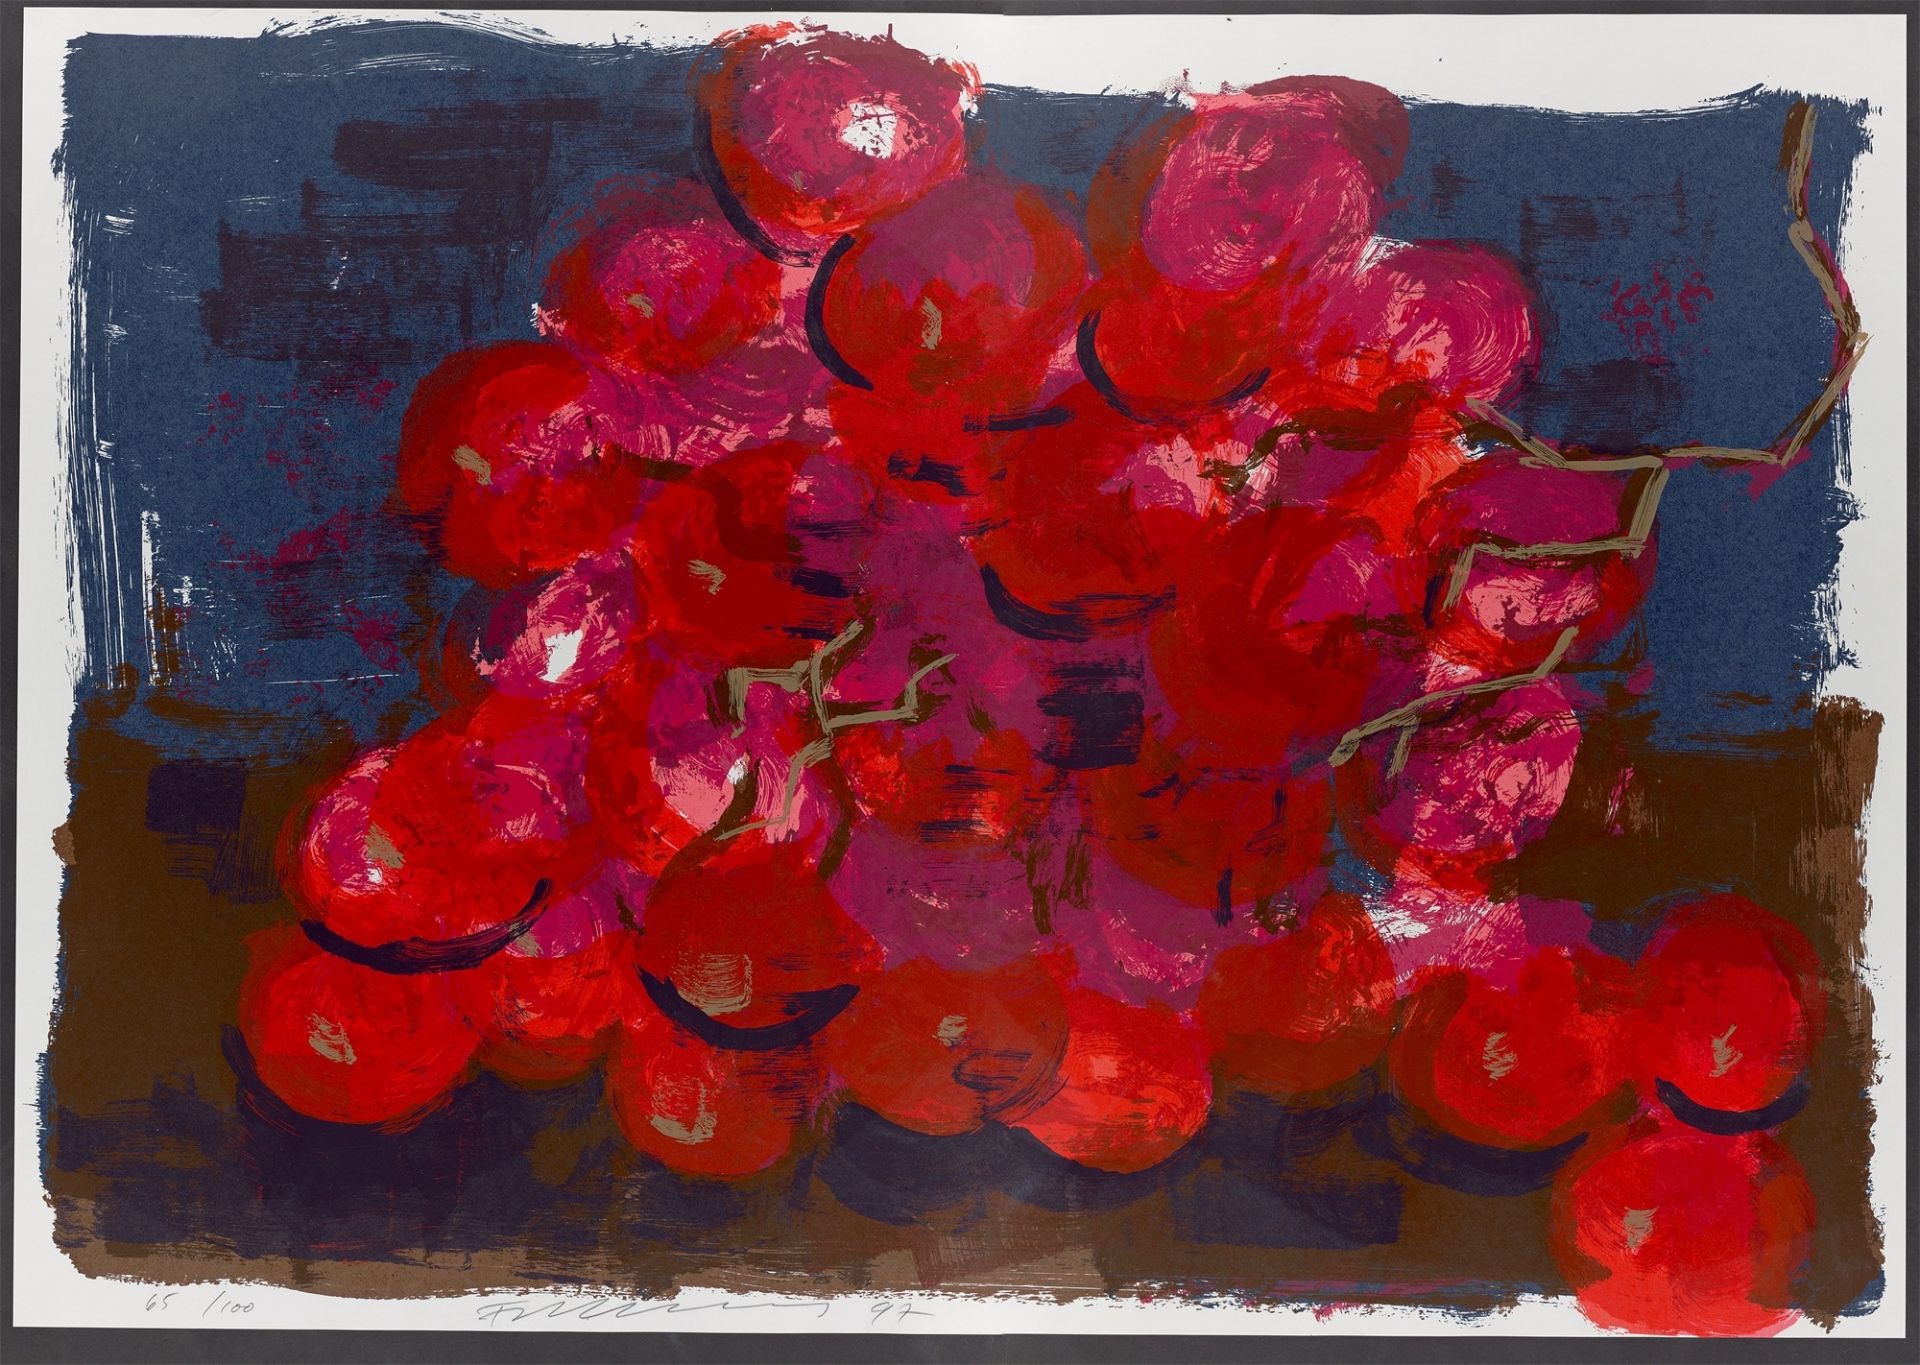 Rainer Fetting. Red grapes. 1987 - Image 2 of 3